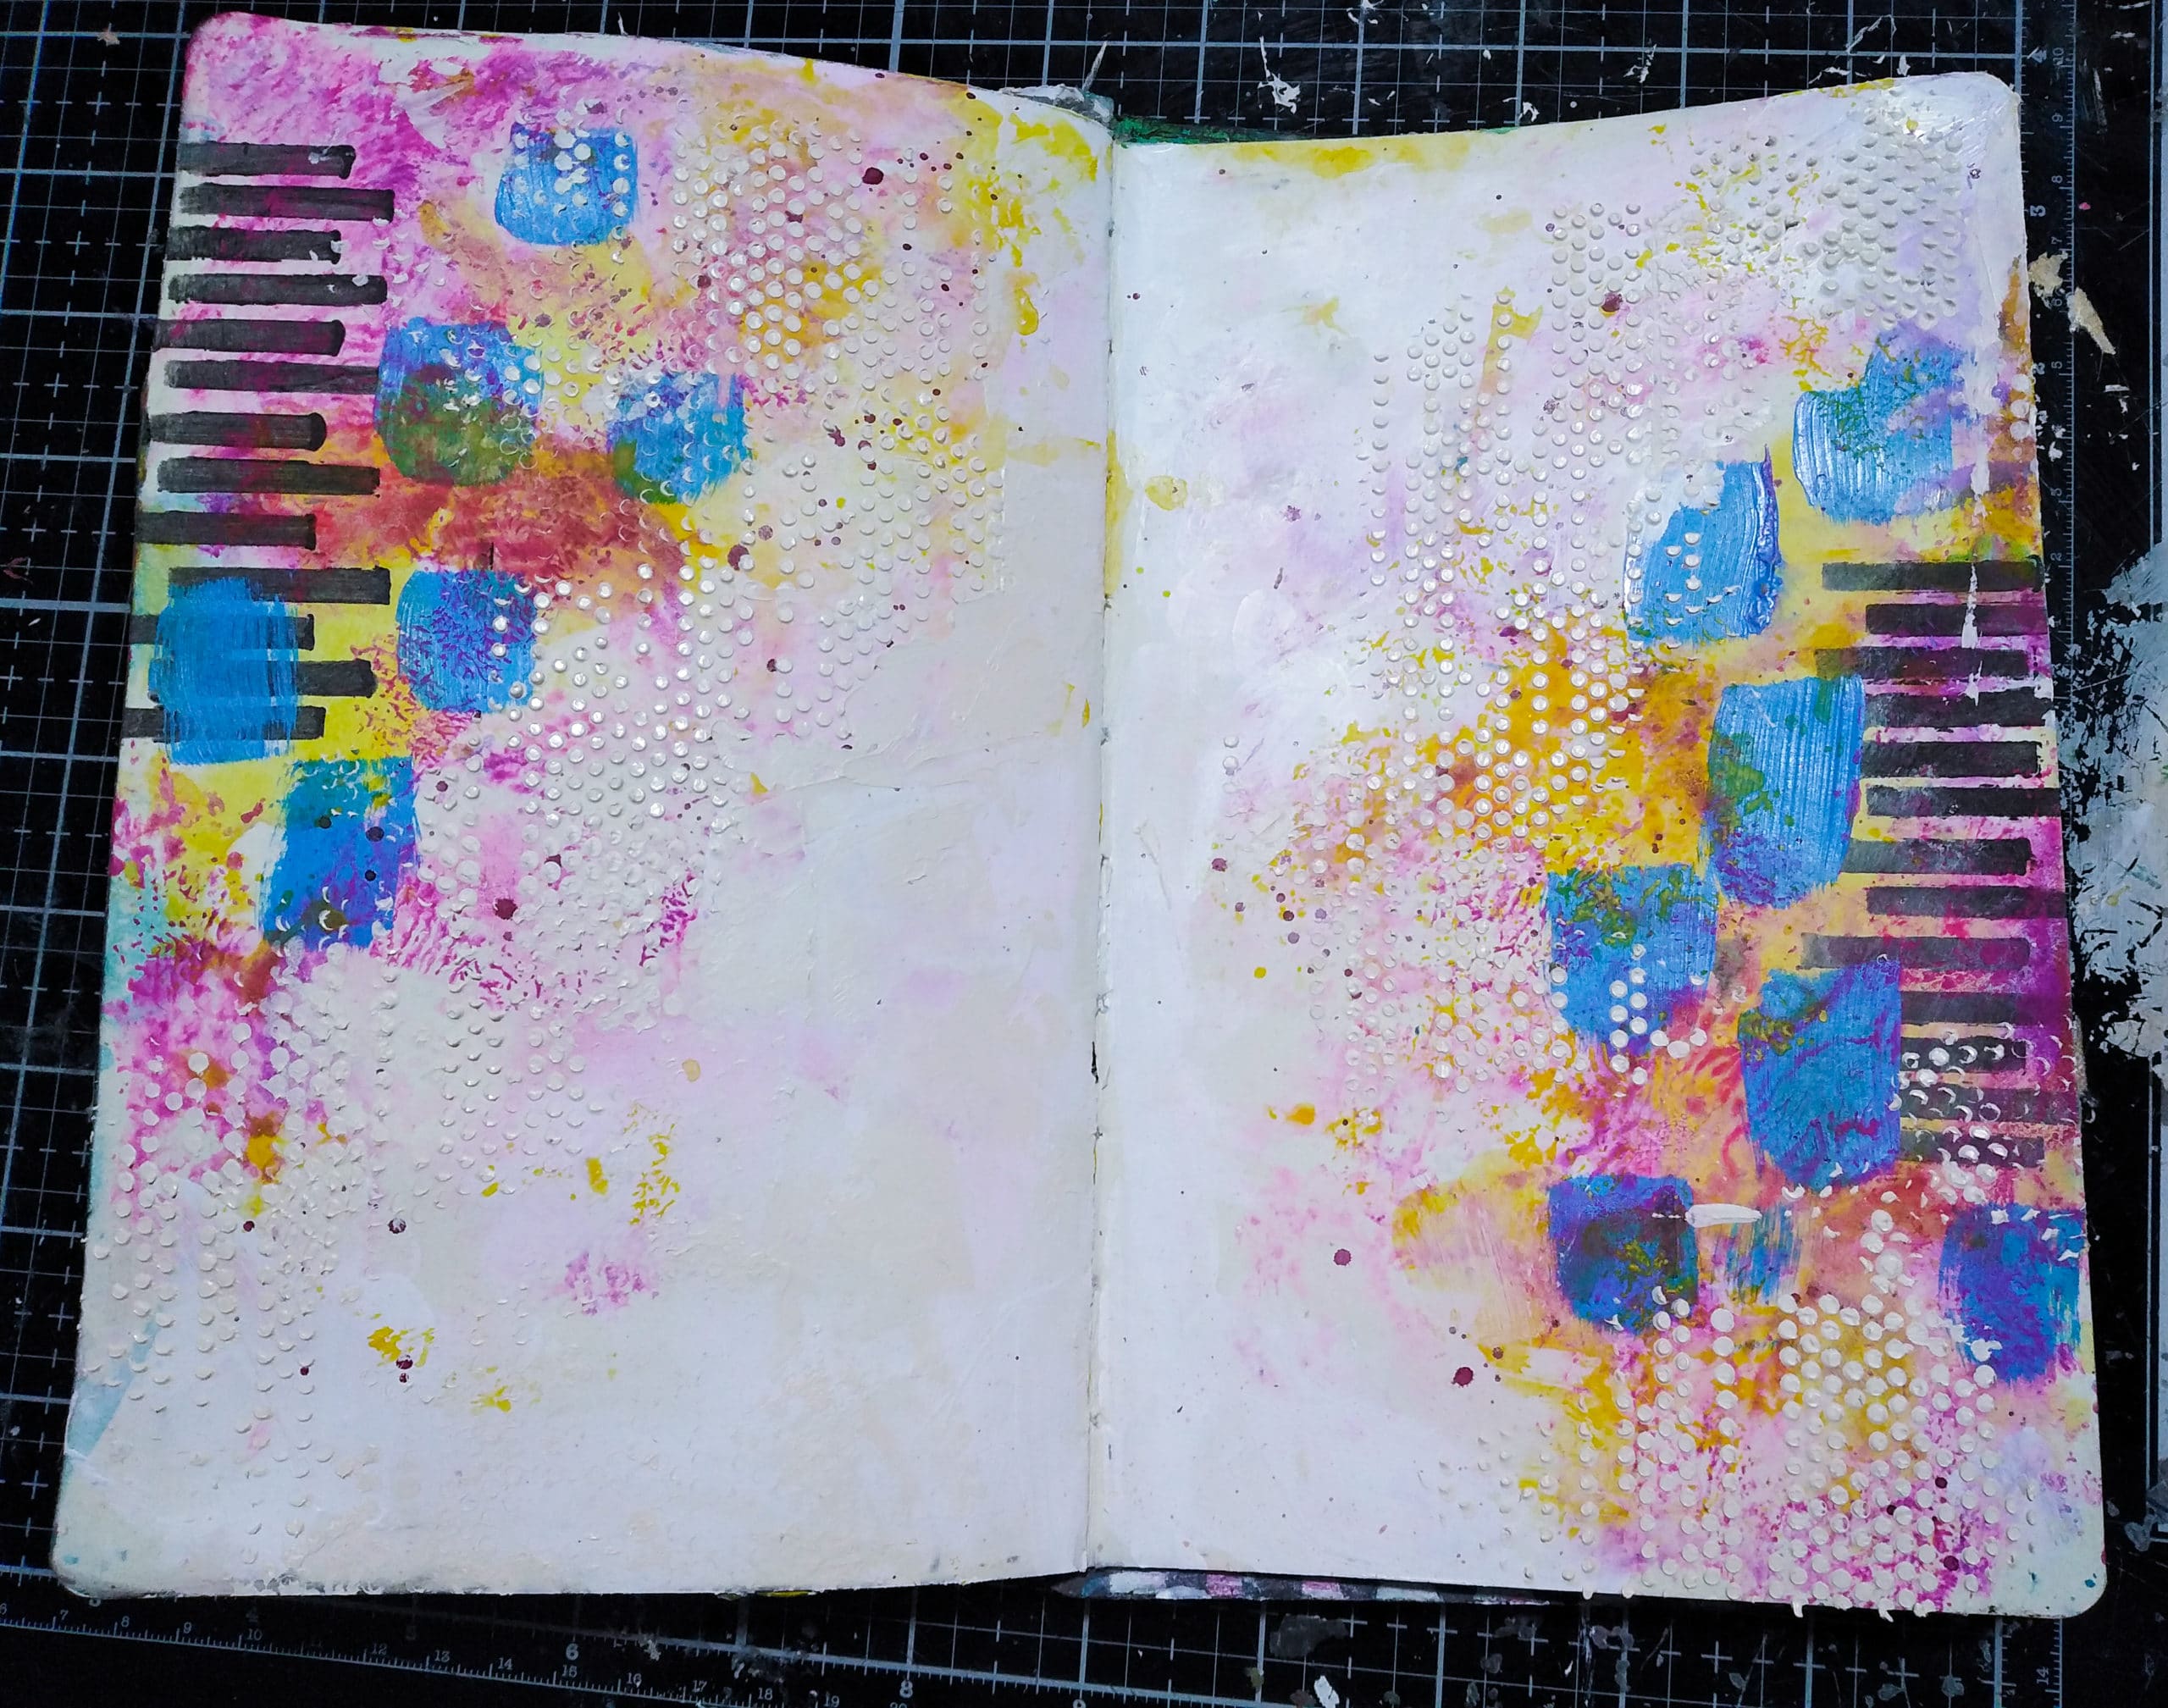 Background texture of mixed media journal spread 